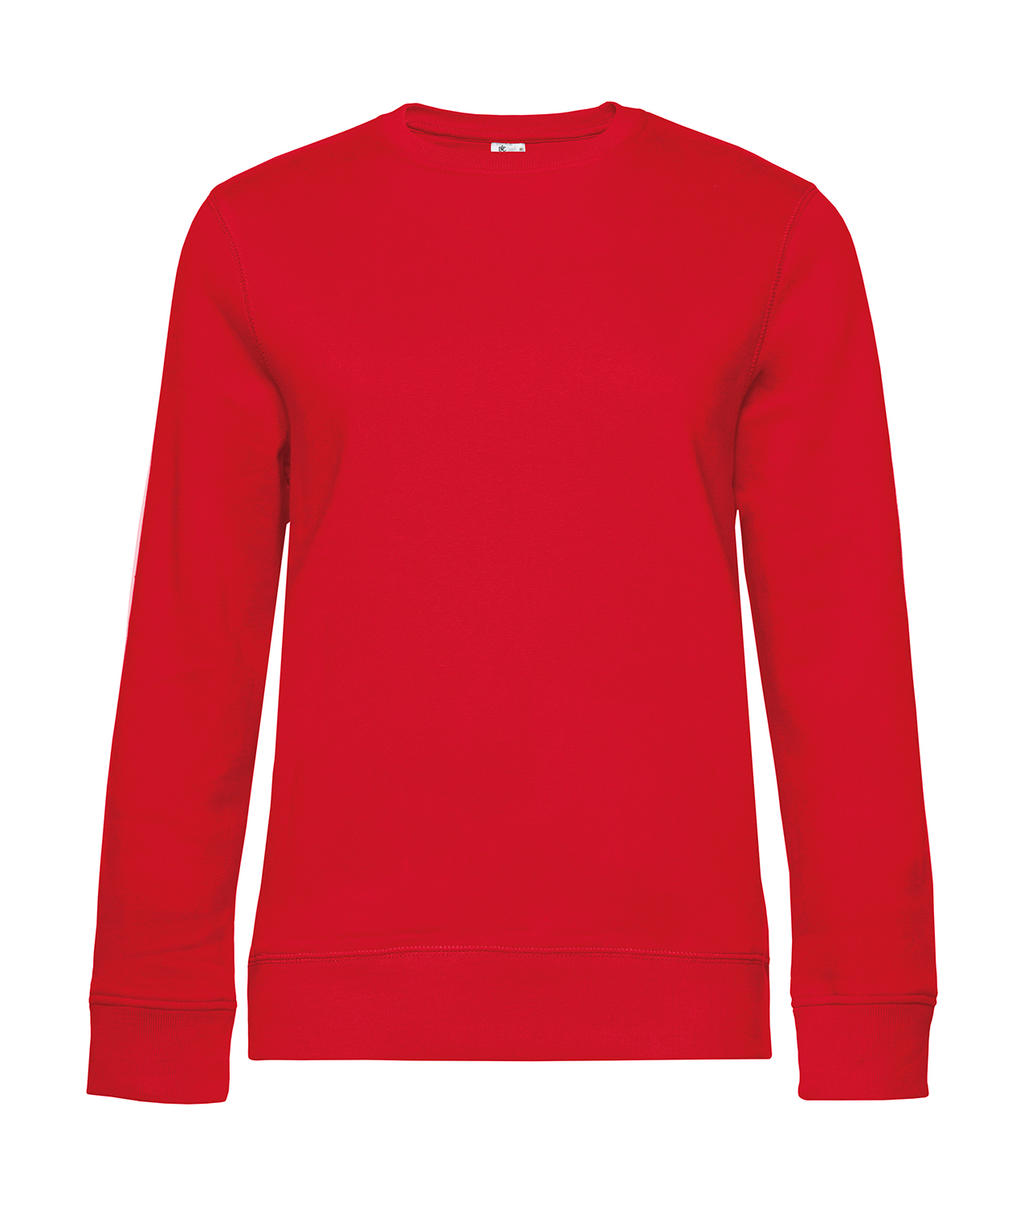  QUEEN Crew Neck_? in Farbe Red